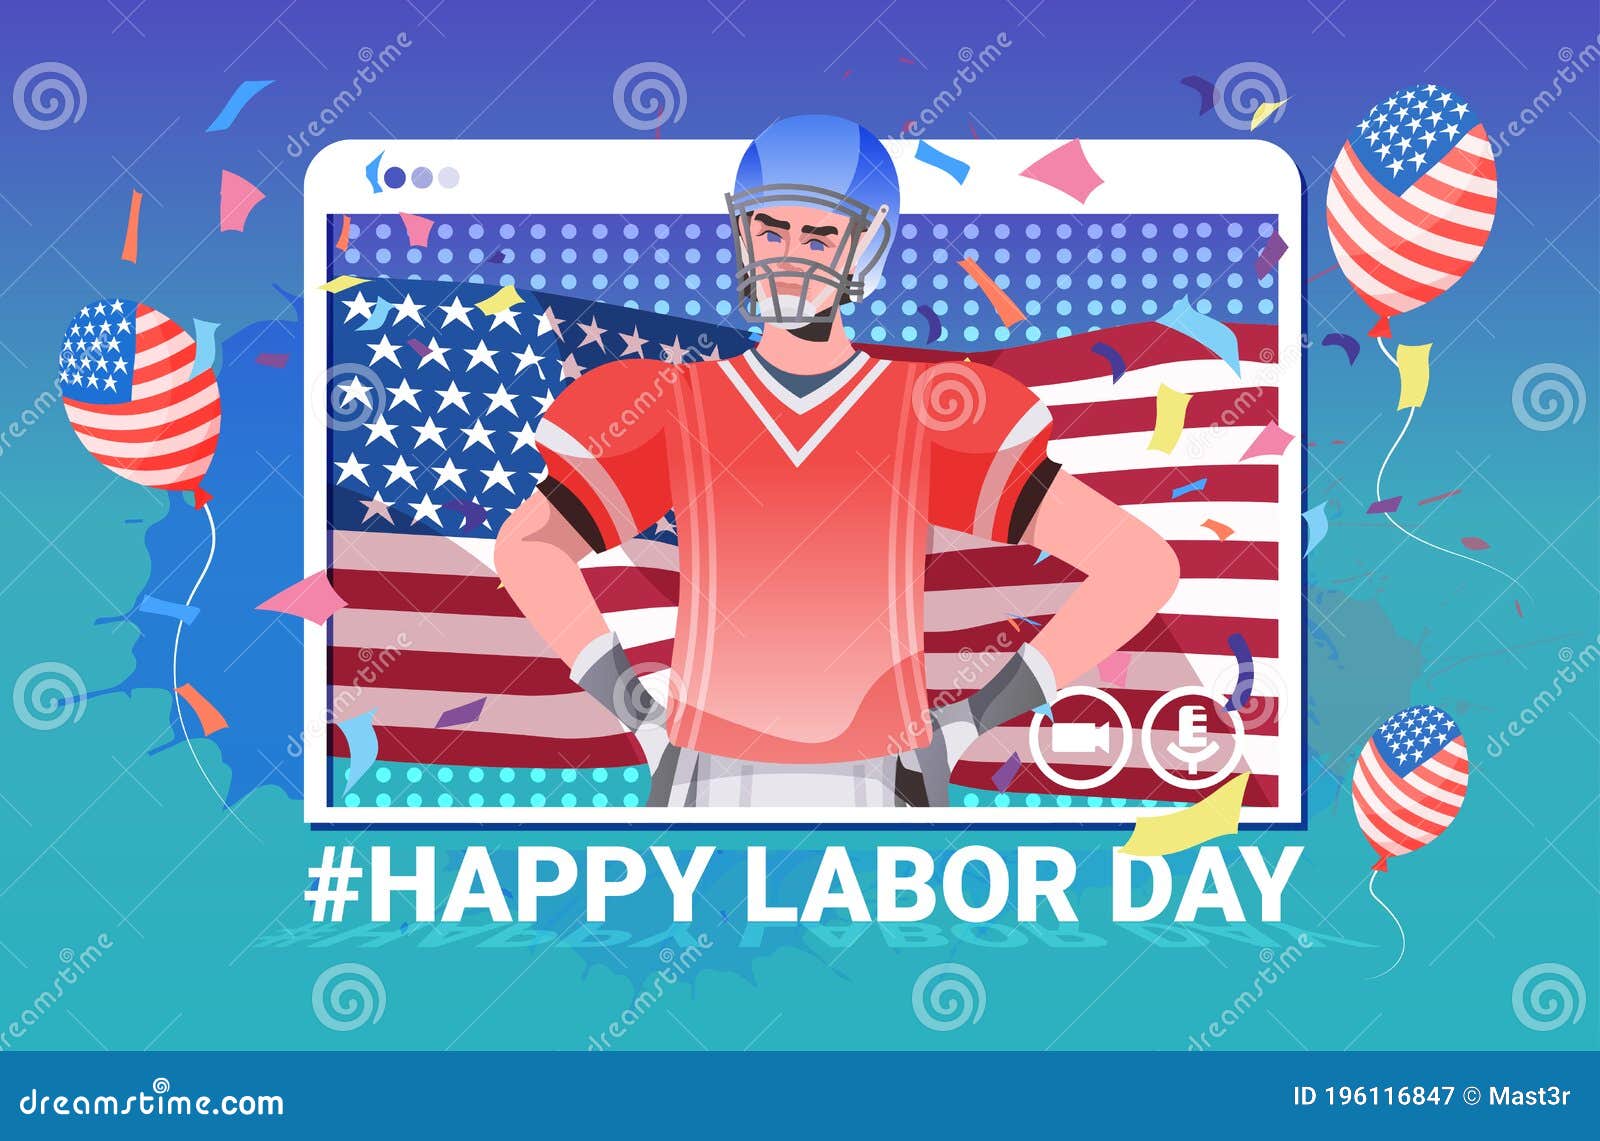 American Football Player with USA Flag Happy Labor Day Celebration Self